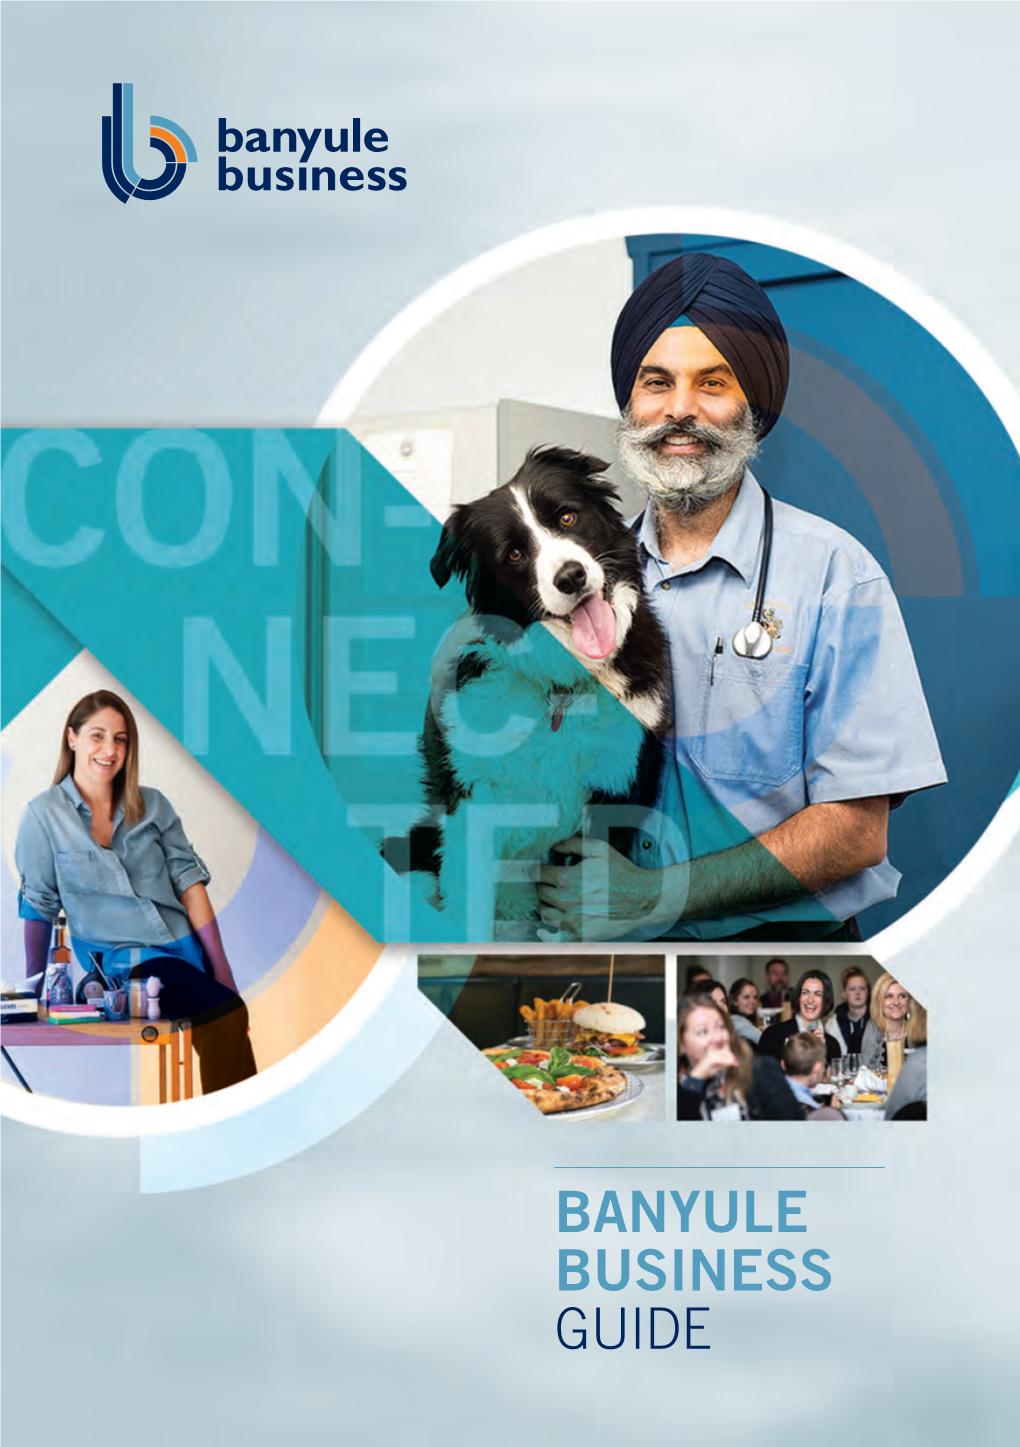 Banyule Business Guide We’Re Here for You